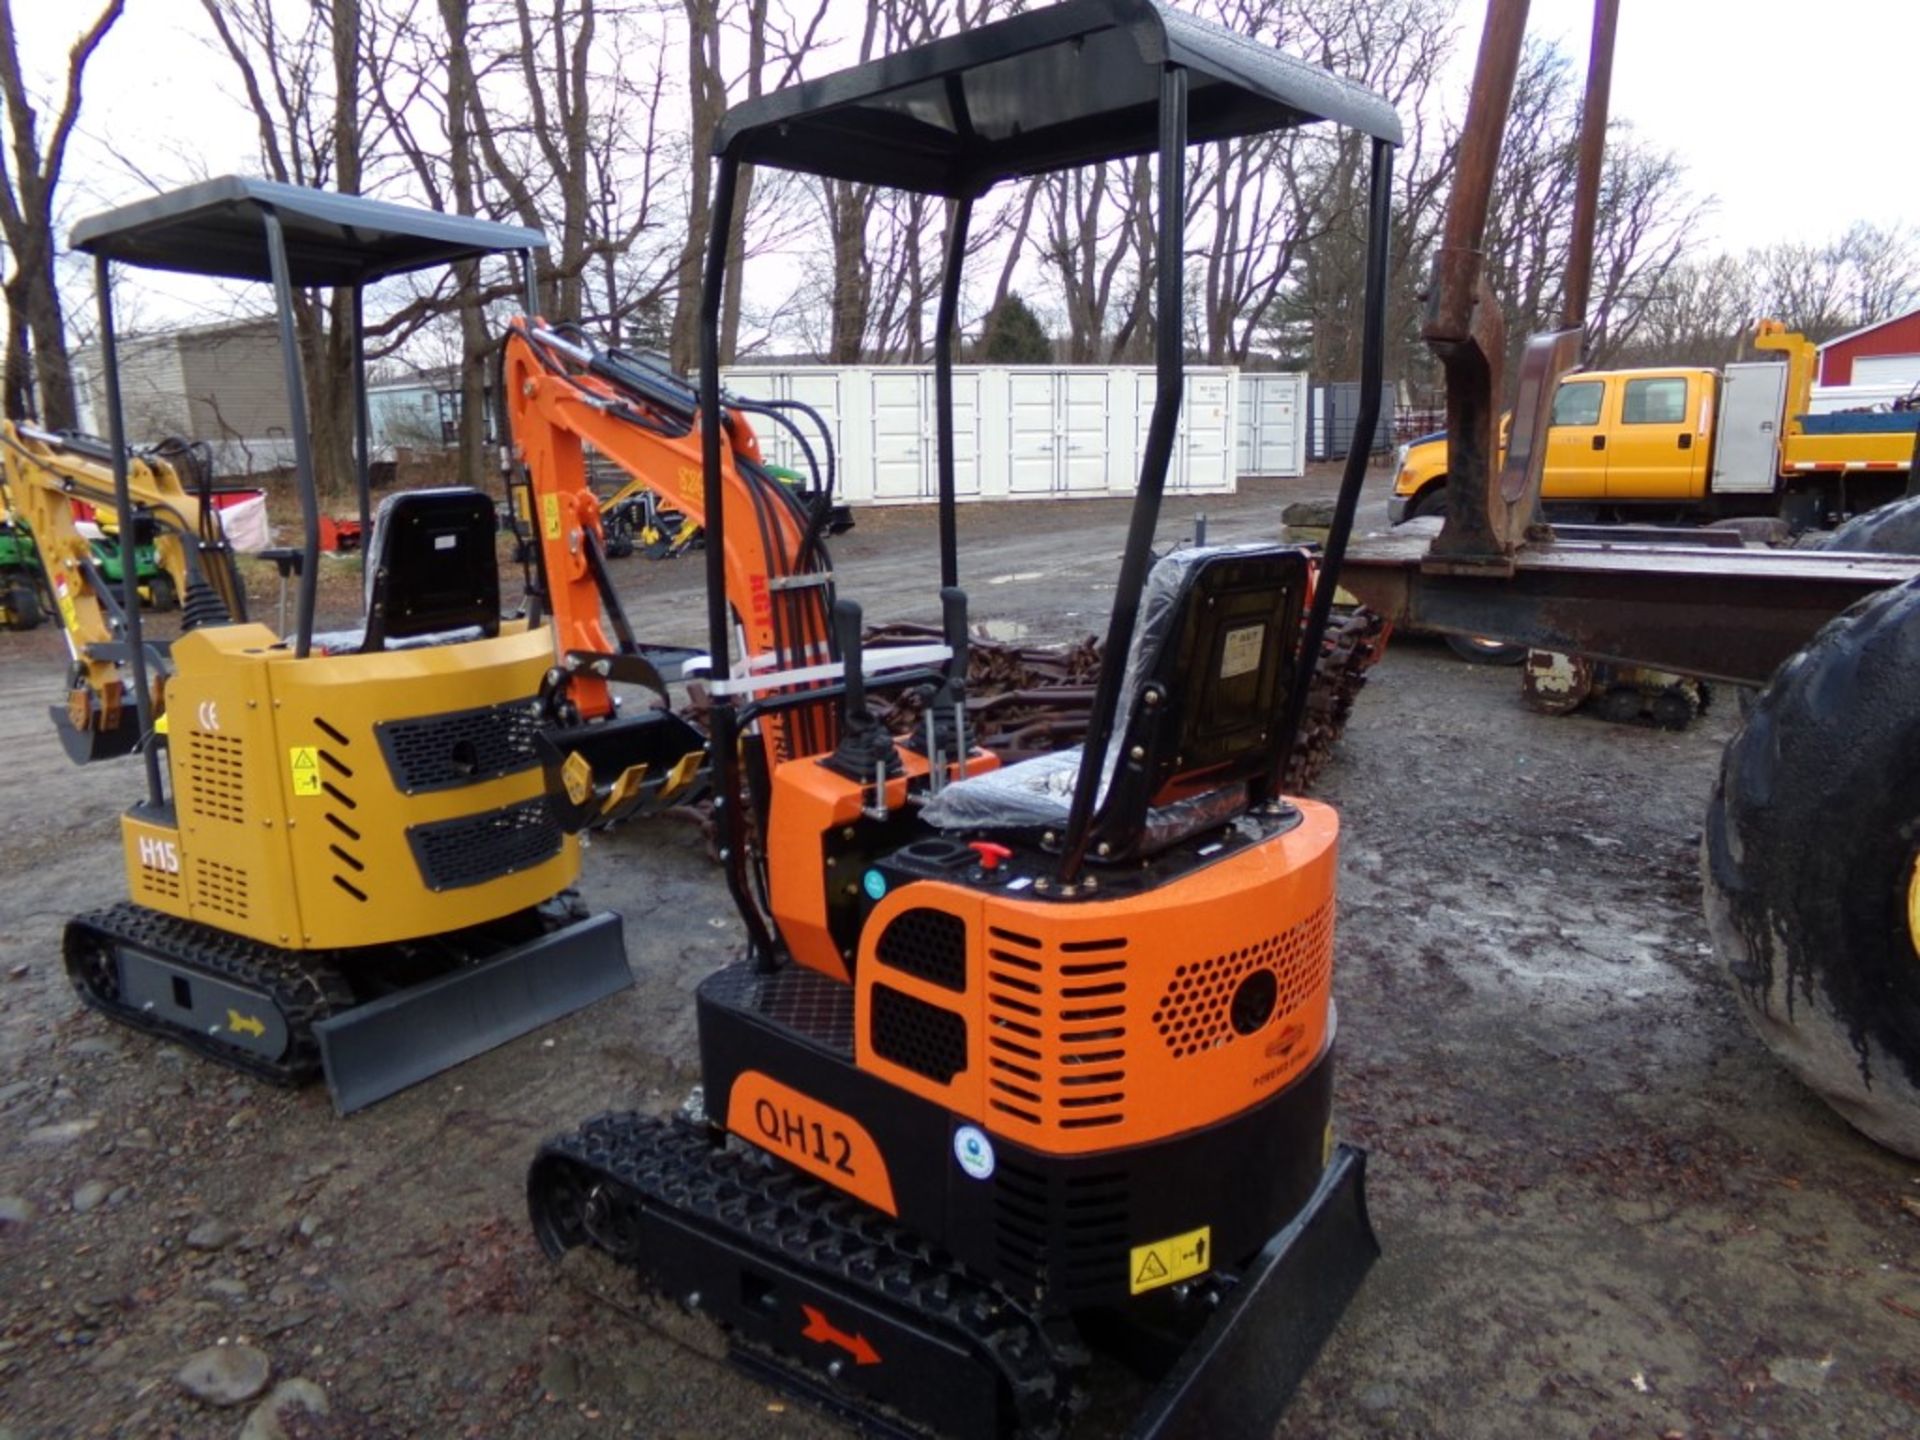 New AGT Industrial QH12 Mini Excavator with Grader Blade, Stationary Thumb, Briggs Gas Engine, - Image 2 of 8